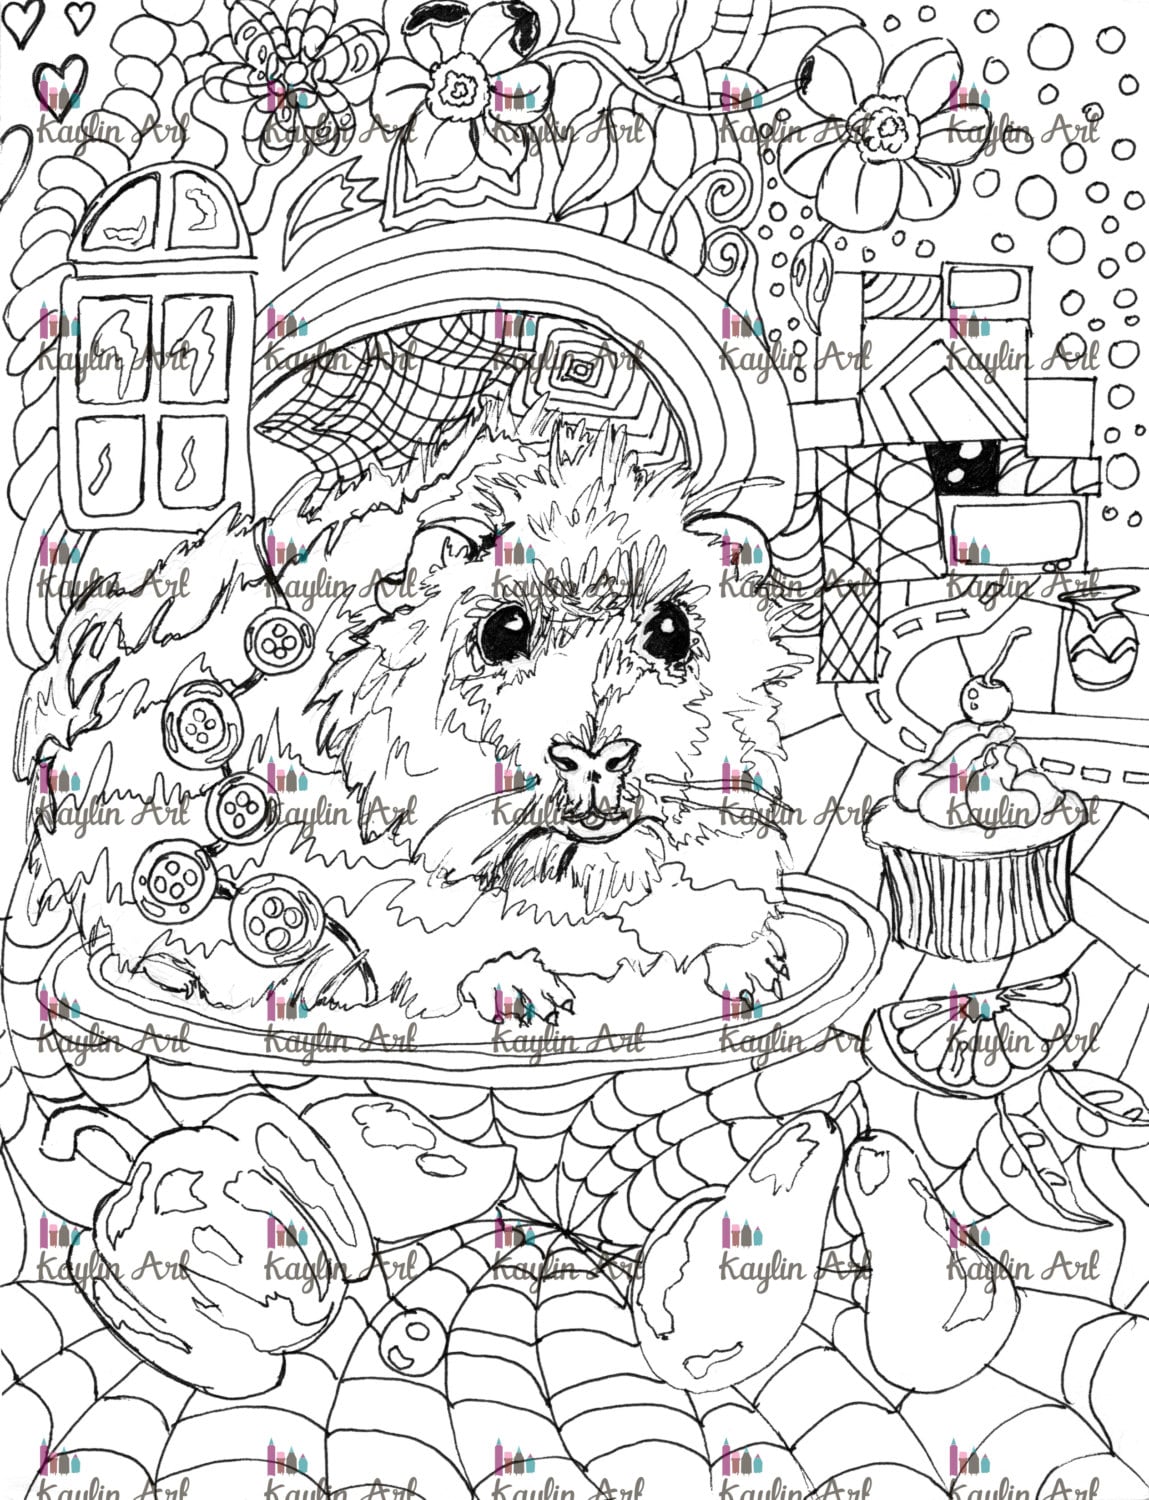 Guinea Pig coloring page Handdrawn super cute Animal forest